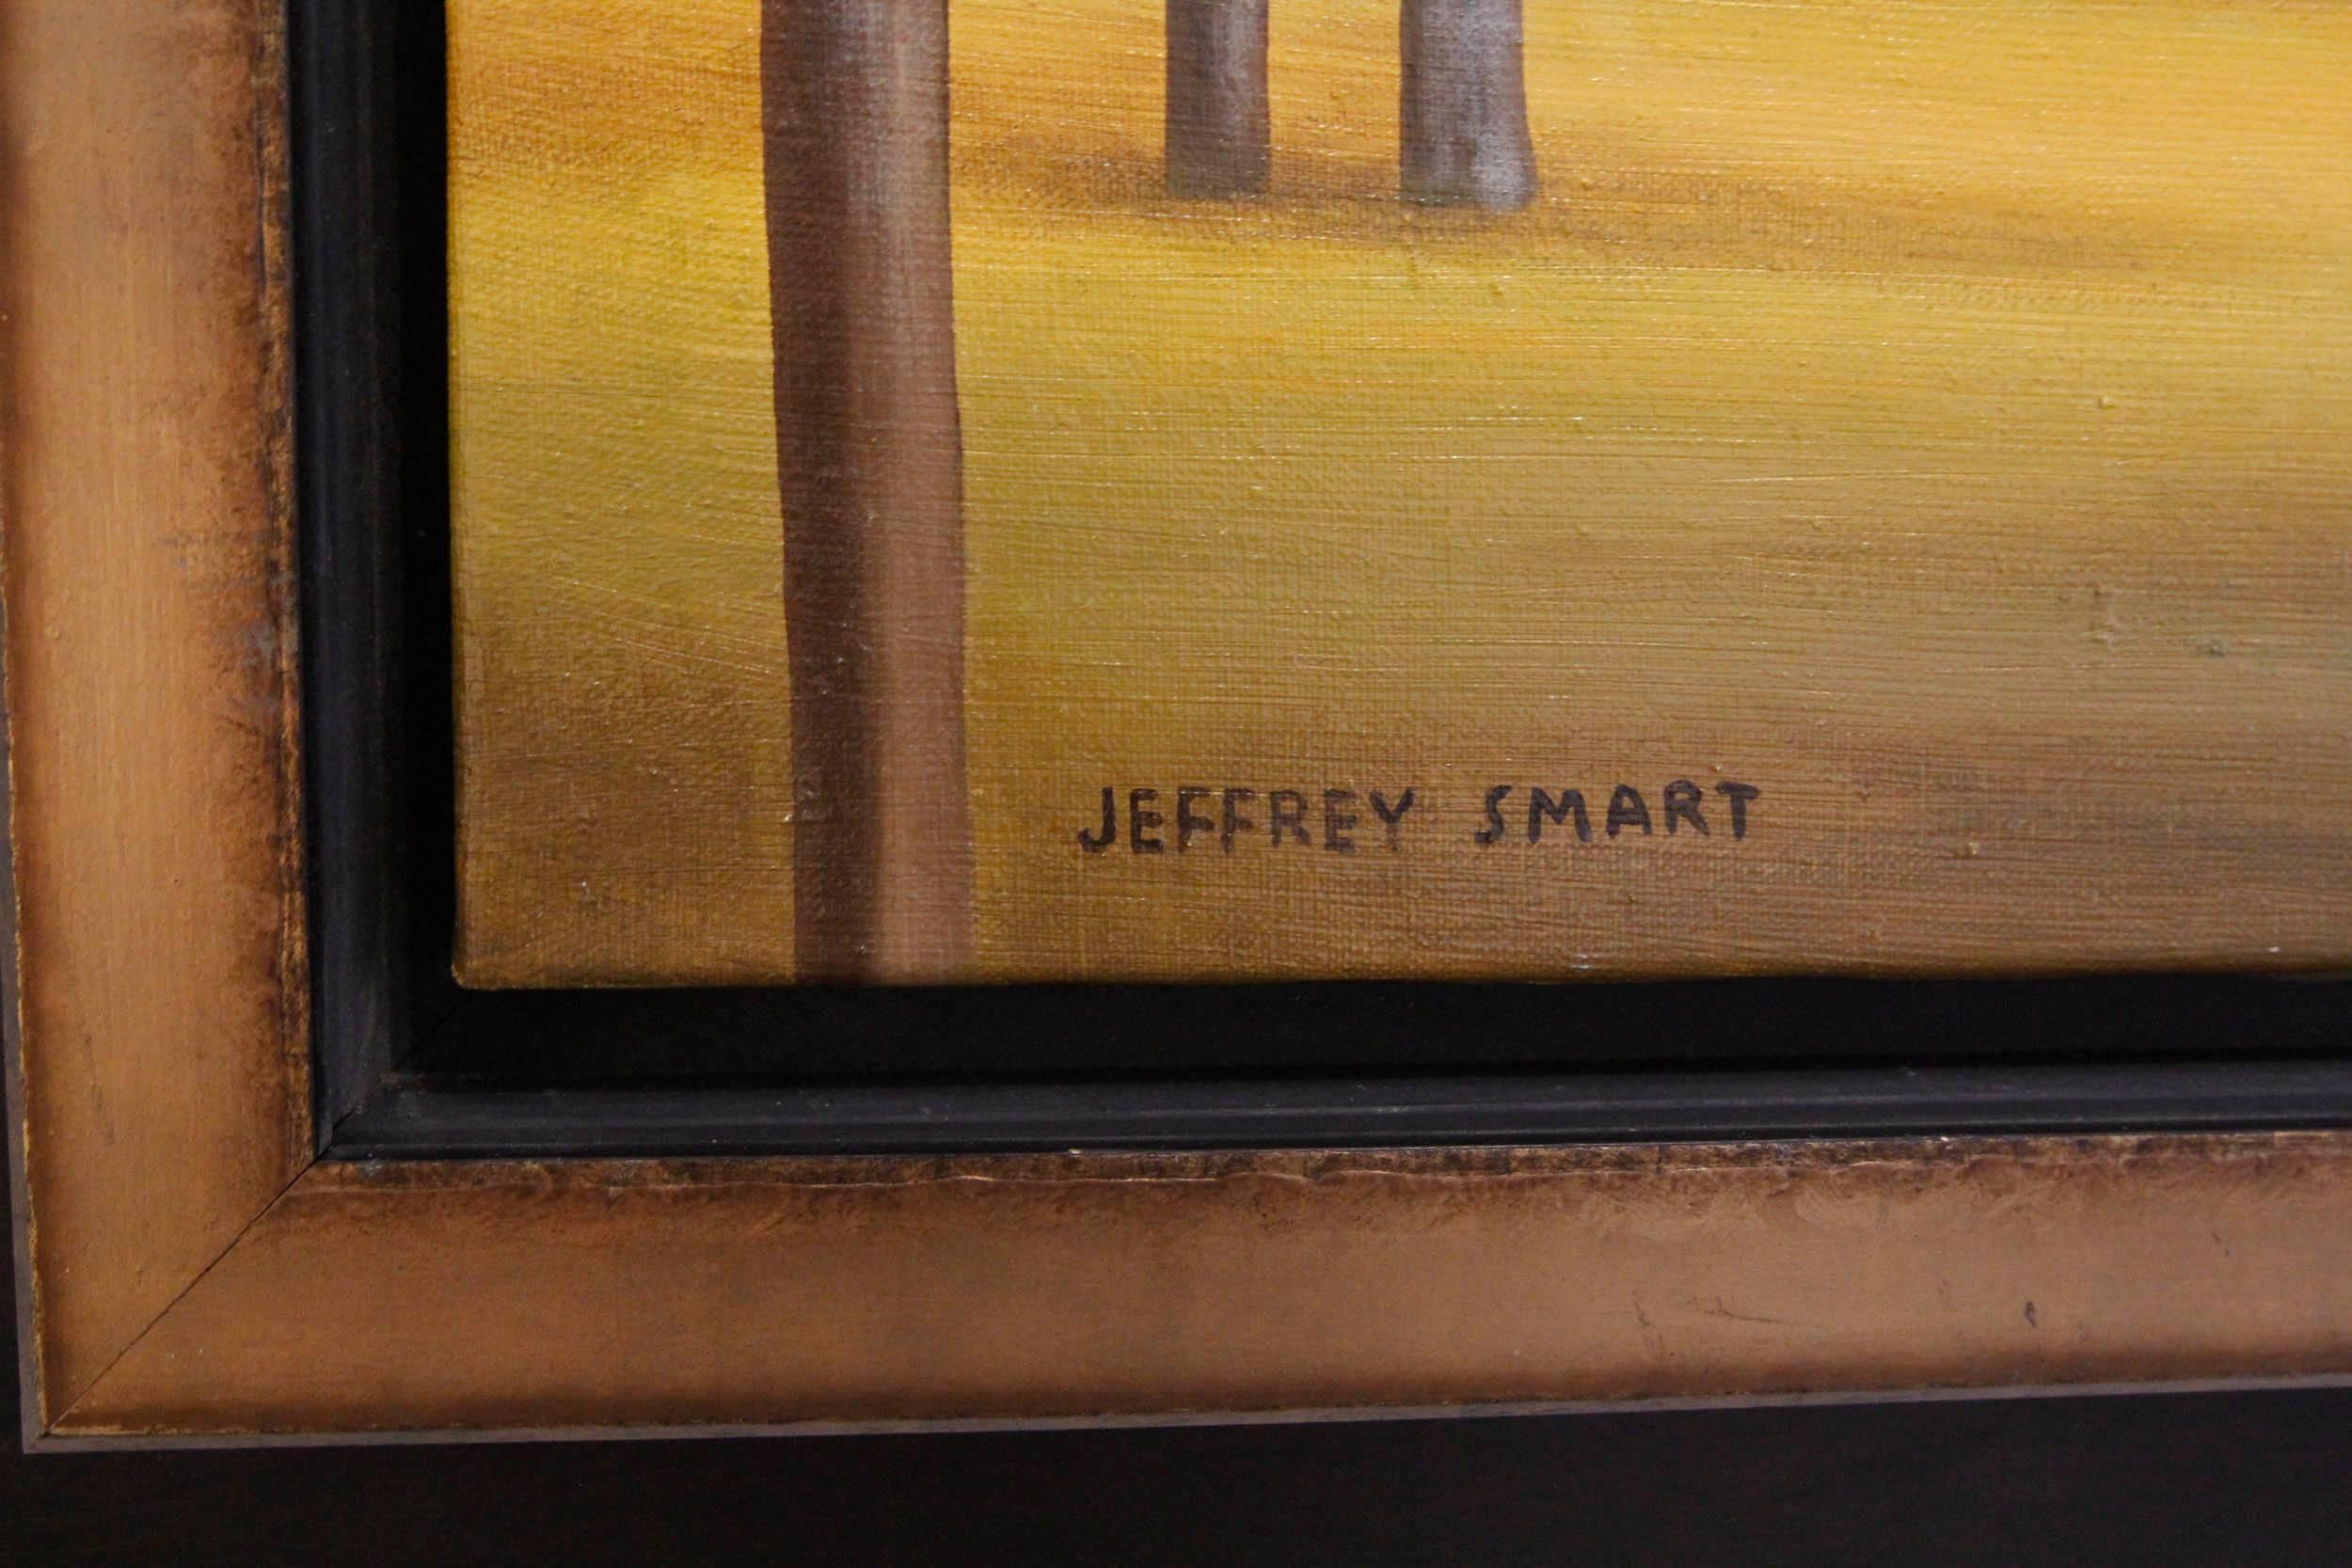 Oil painting depicting train cars with trees in the forefront of the composition. Painted in style of Jeffrey Smart, but not his hand.